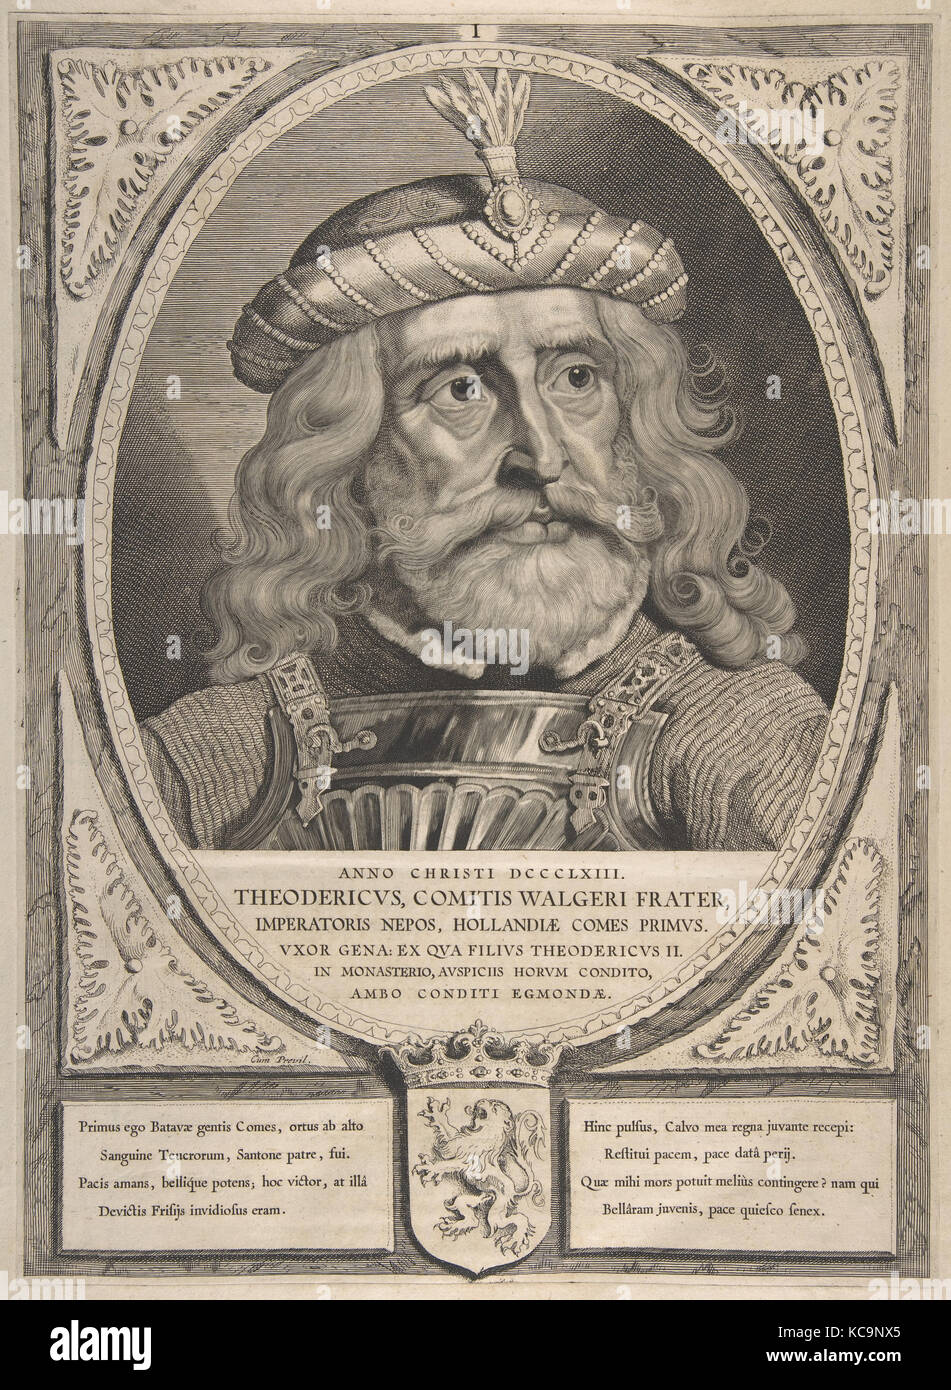 Theodoric, 1650, Engraving and etching, state III of IV, sheet: 20 1/2 x 15 1/8 in. (52.1 x 38.4 cm), Books Stock Photo